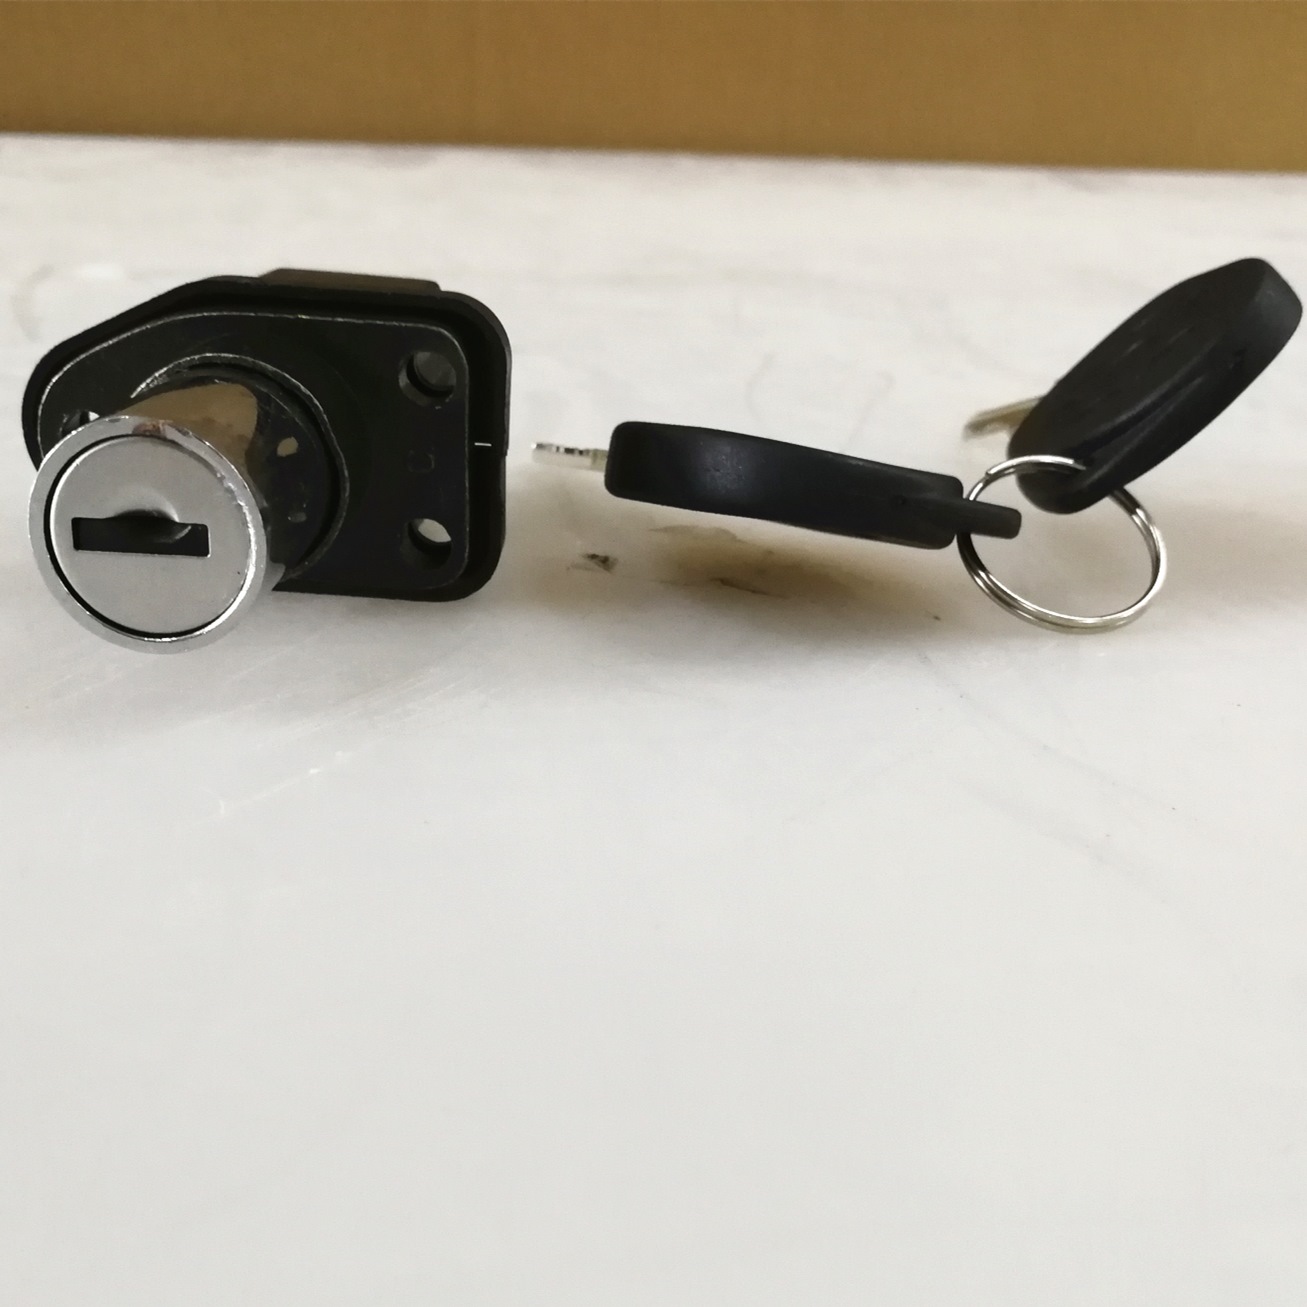 HC-B-10256 BUS LOCK WITH CYLINDER FOR MARCO POLO